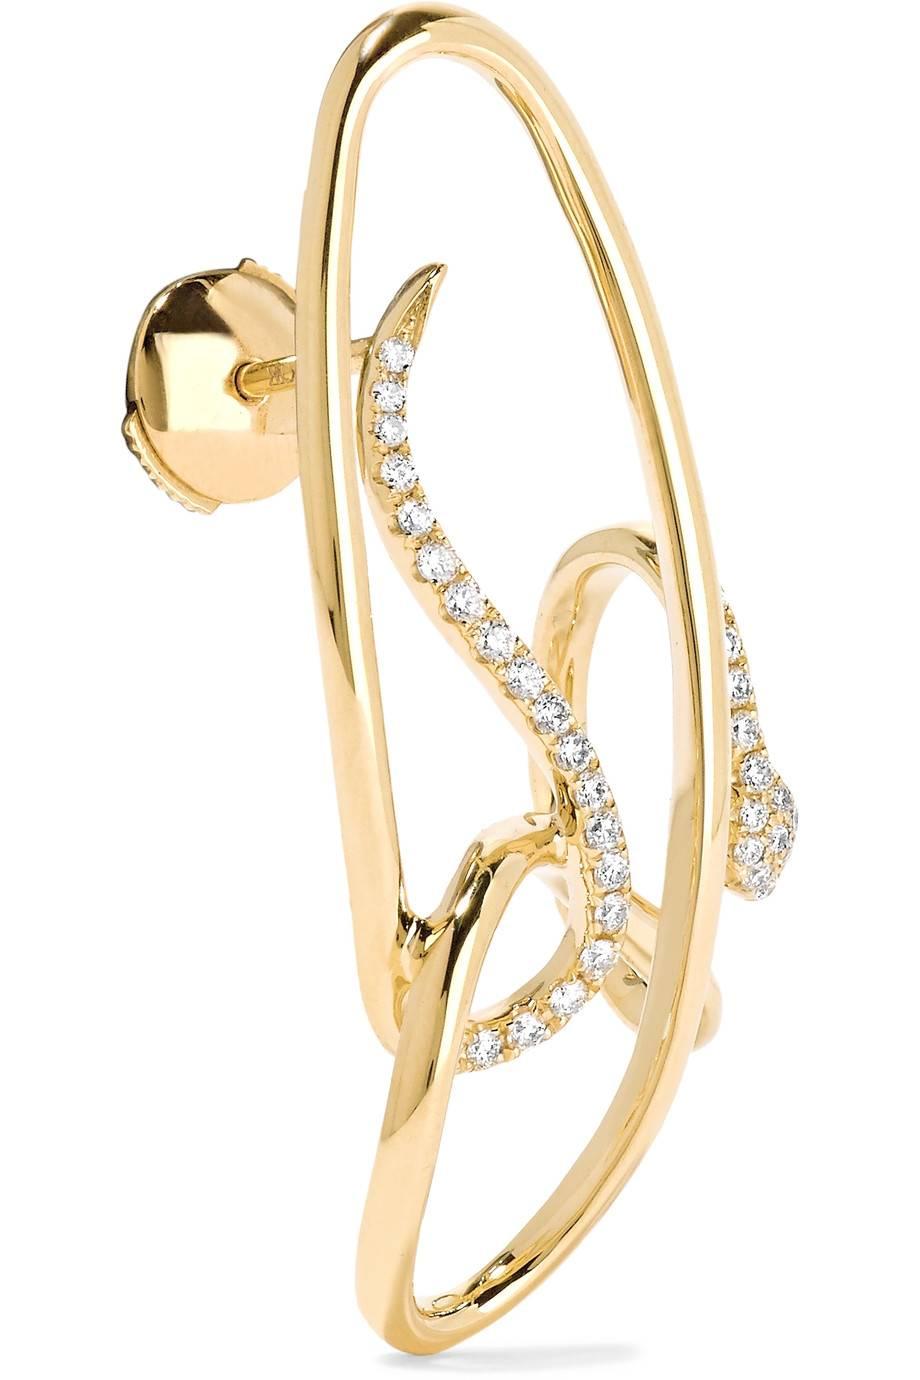 Earring in 18K yellow gold 5,6gr
Diamonds 0,22 carats 
Alpa System
Sold by Unit